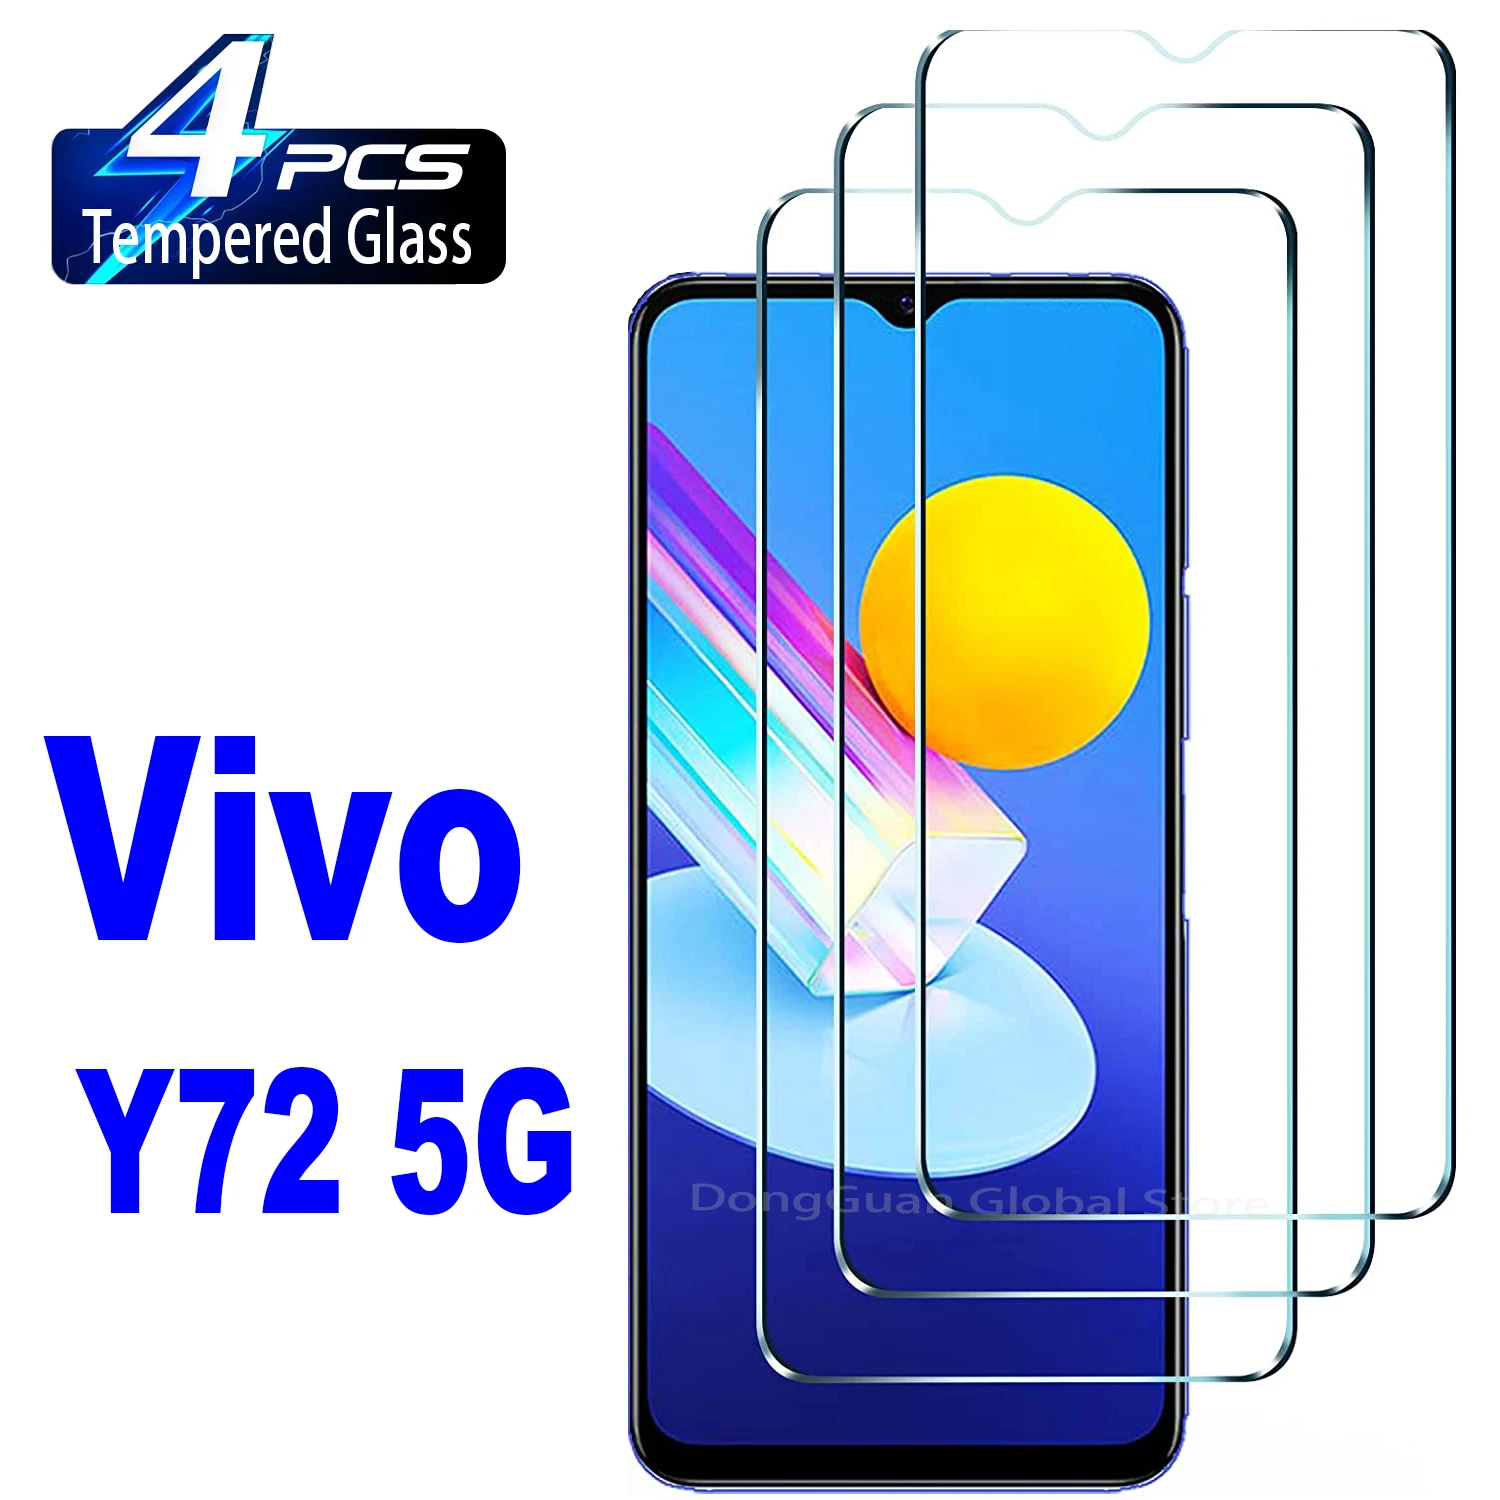 2/4Pcs Tempered Glass For Vivo Y72 5G Screen Protector Glass Film